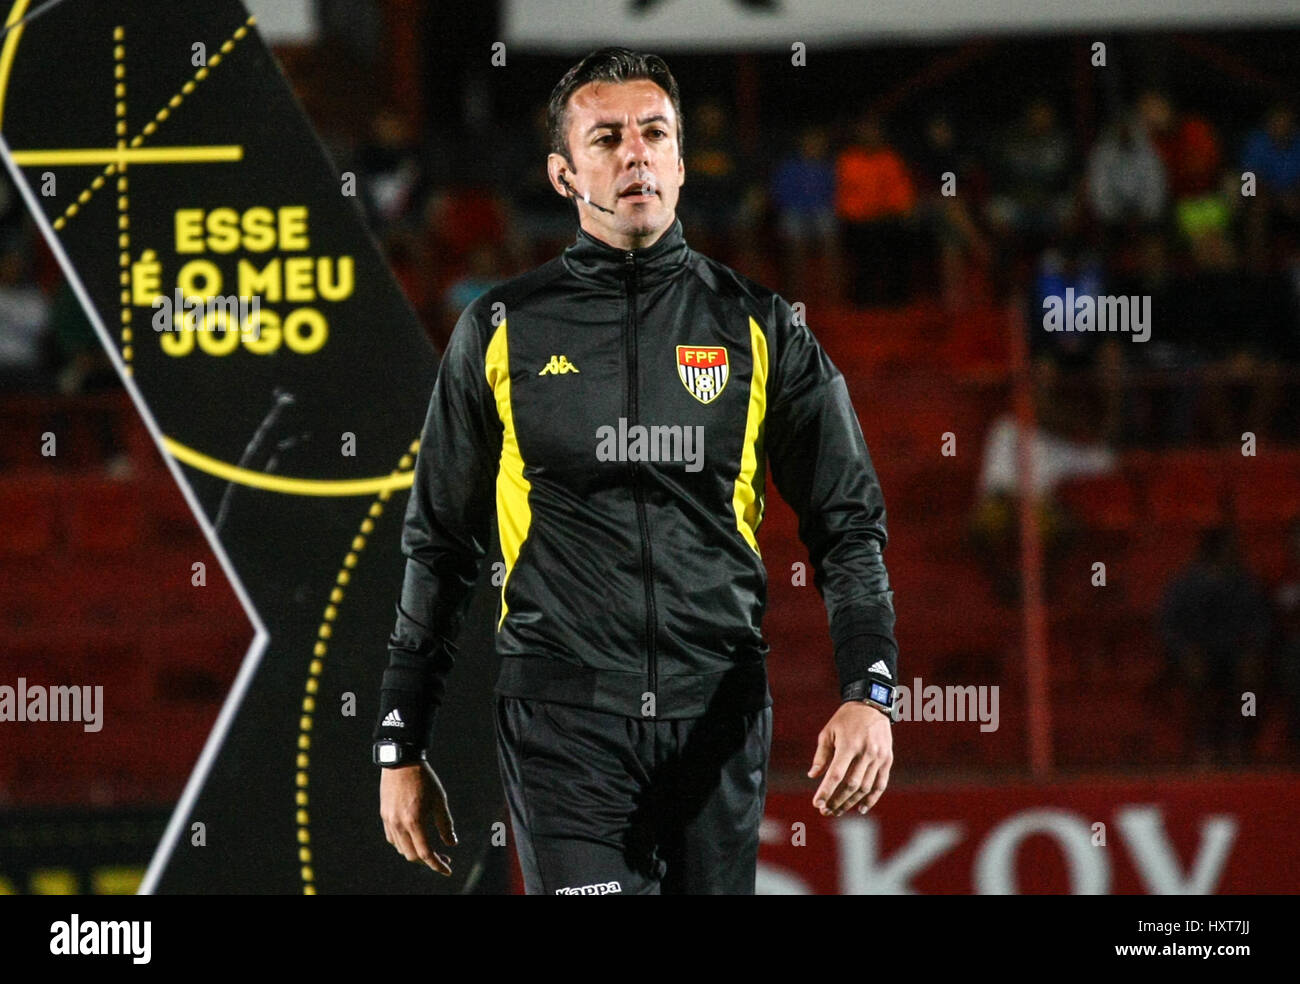 Osasco, Brazil. 29th Mar, 2017. pictured the referee, Raphael Claus. Match between Audax x Santo André, valid for the Paulista Championship 2017, held at the Estadio José Liberatti in Osasco, in Greater São Paulo. Credit: Aloisio Mauricio/FotoArena/Alamy Live News Stock Photo